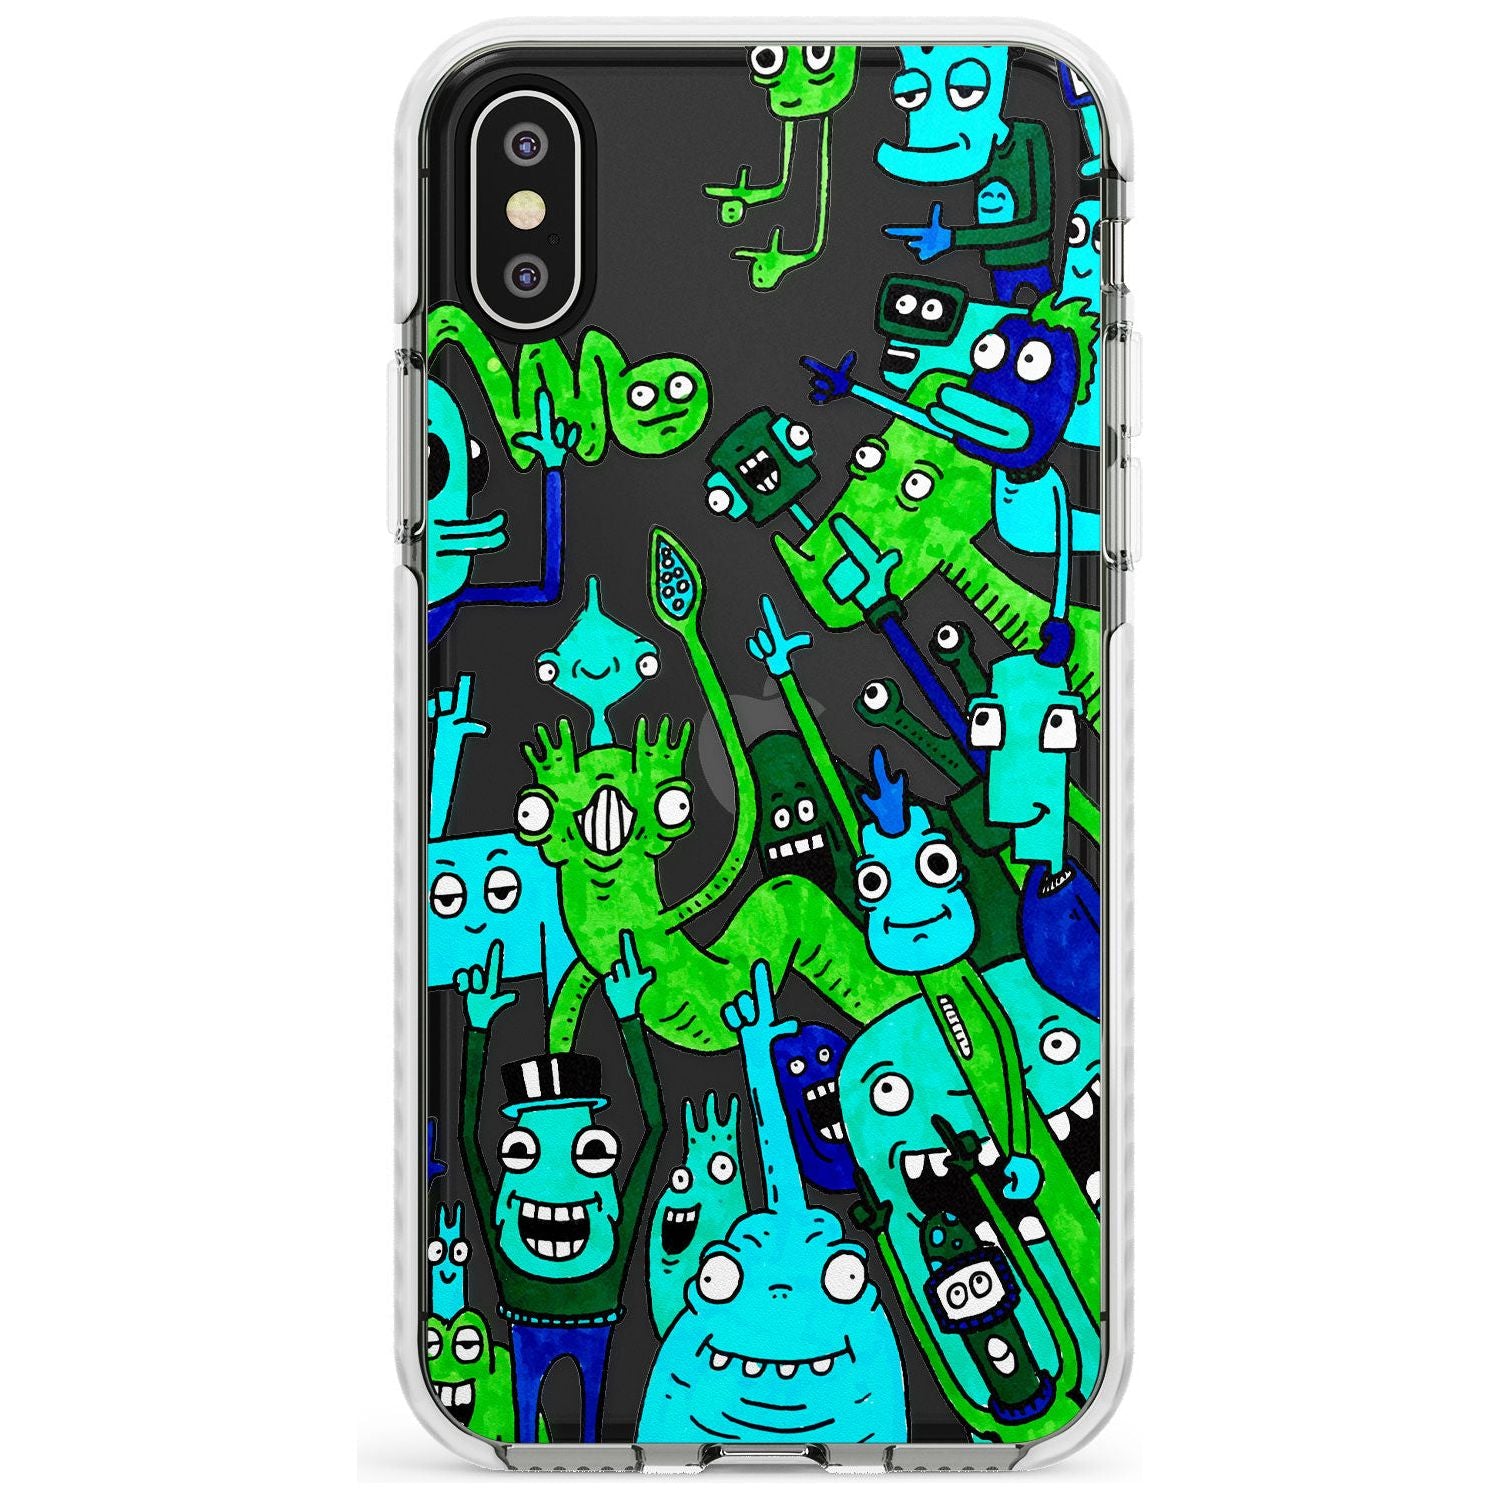 Don't Point Impact Phone Case for iPhone X XS Max XR